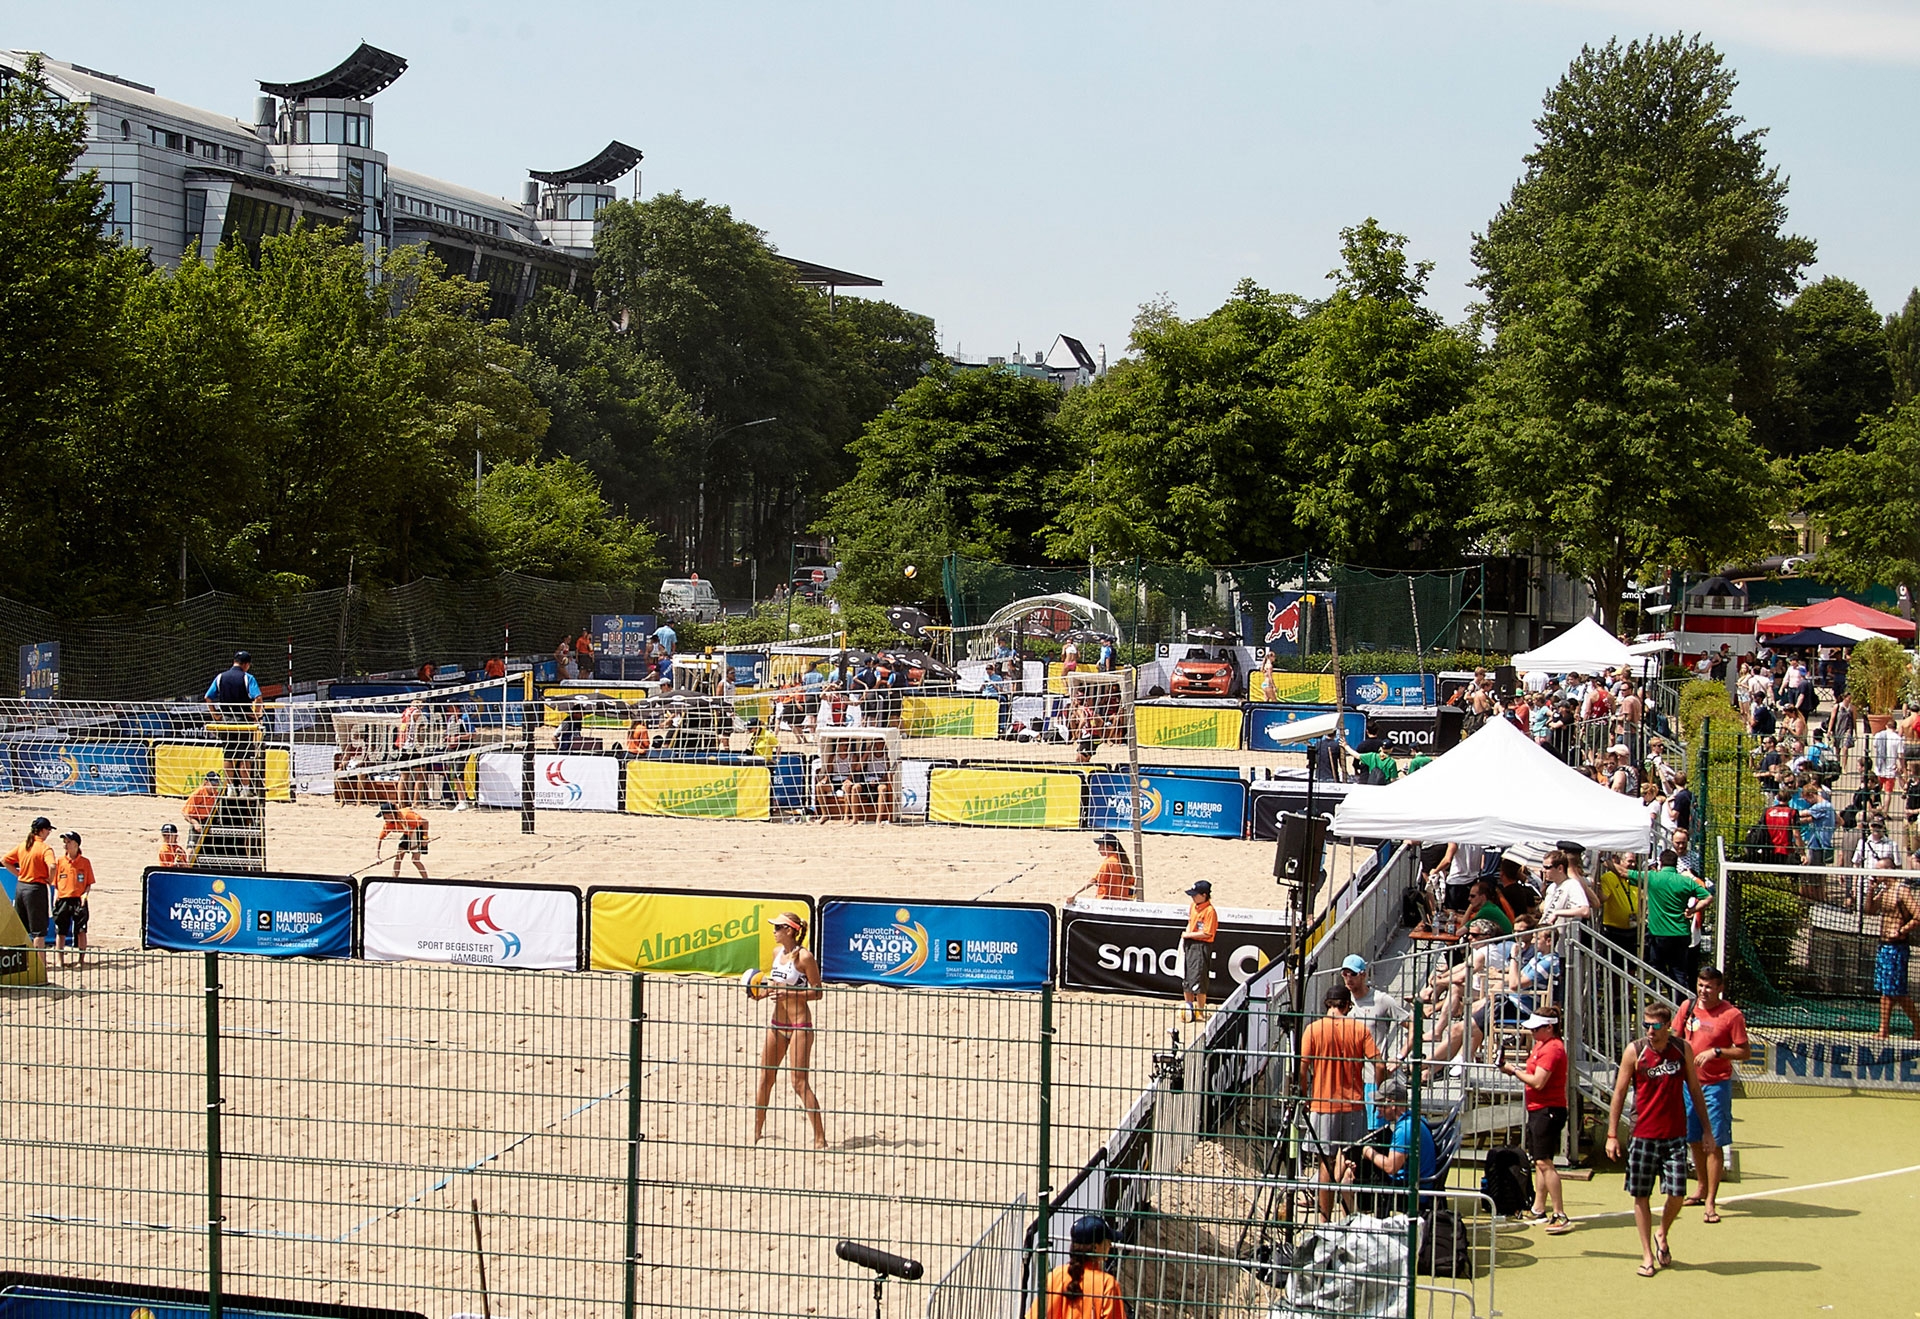 Overview of the side courts at smart Major Hamburg; Photocredit: Mike Ranz